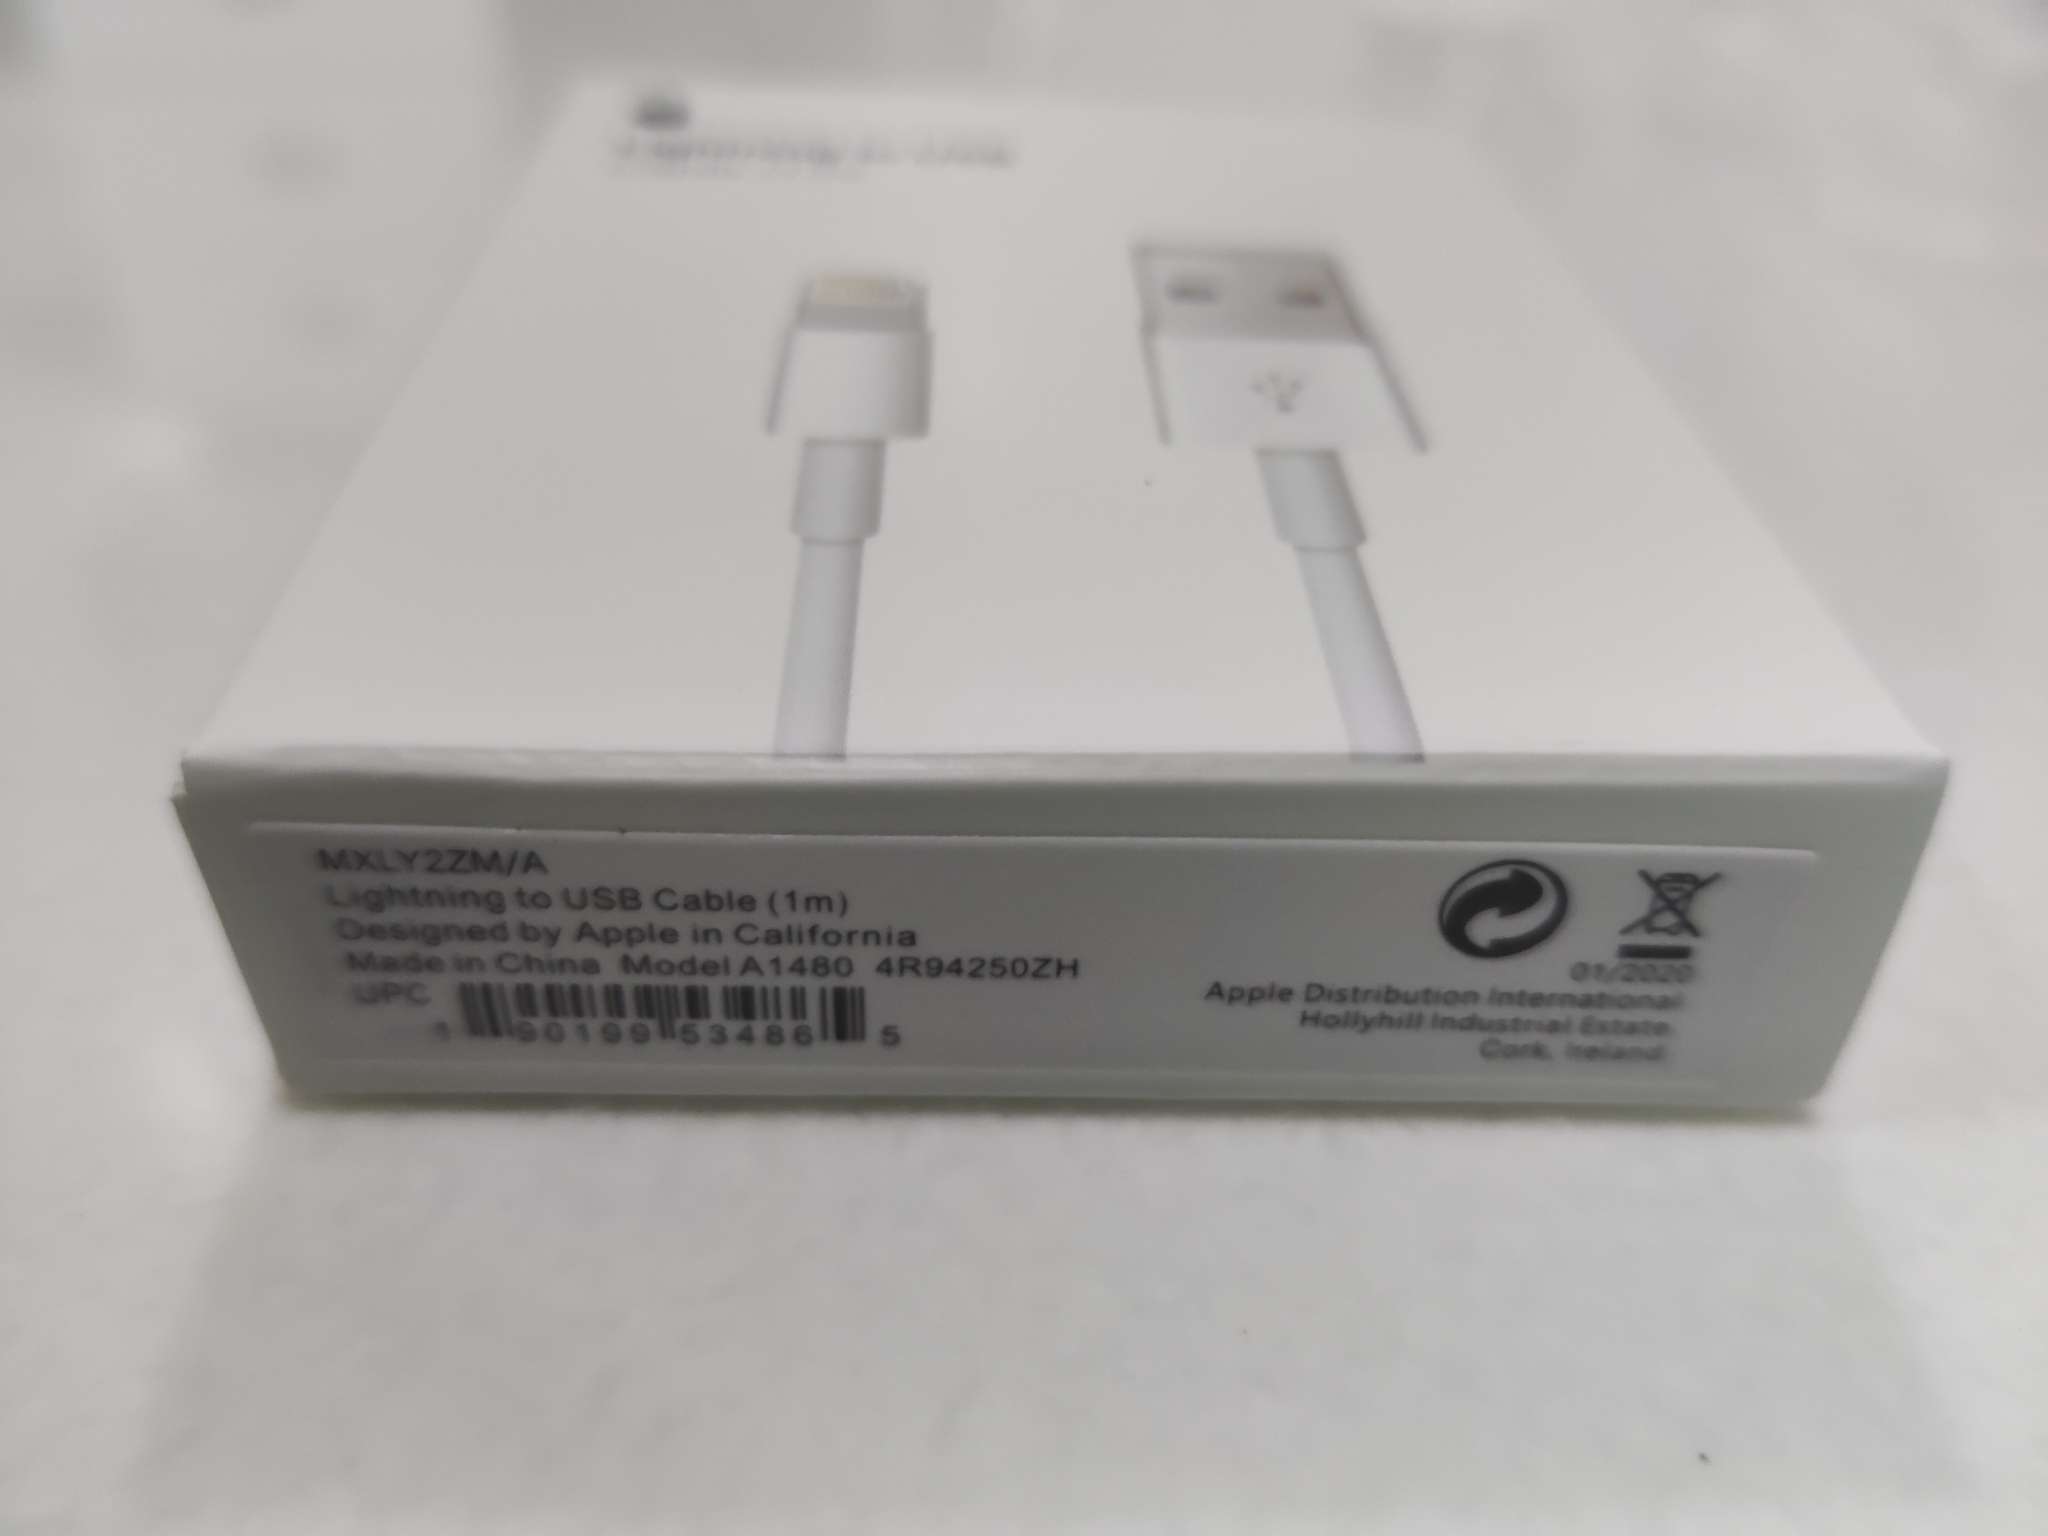 Apple 1mtr Lightning to USB Cable - Rs.1000